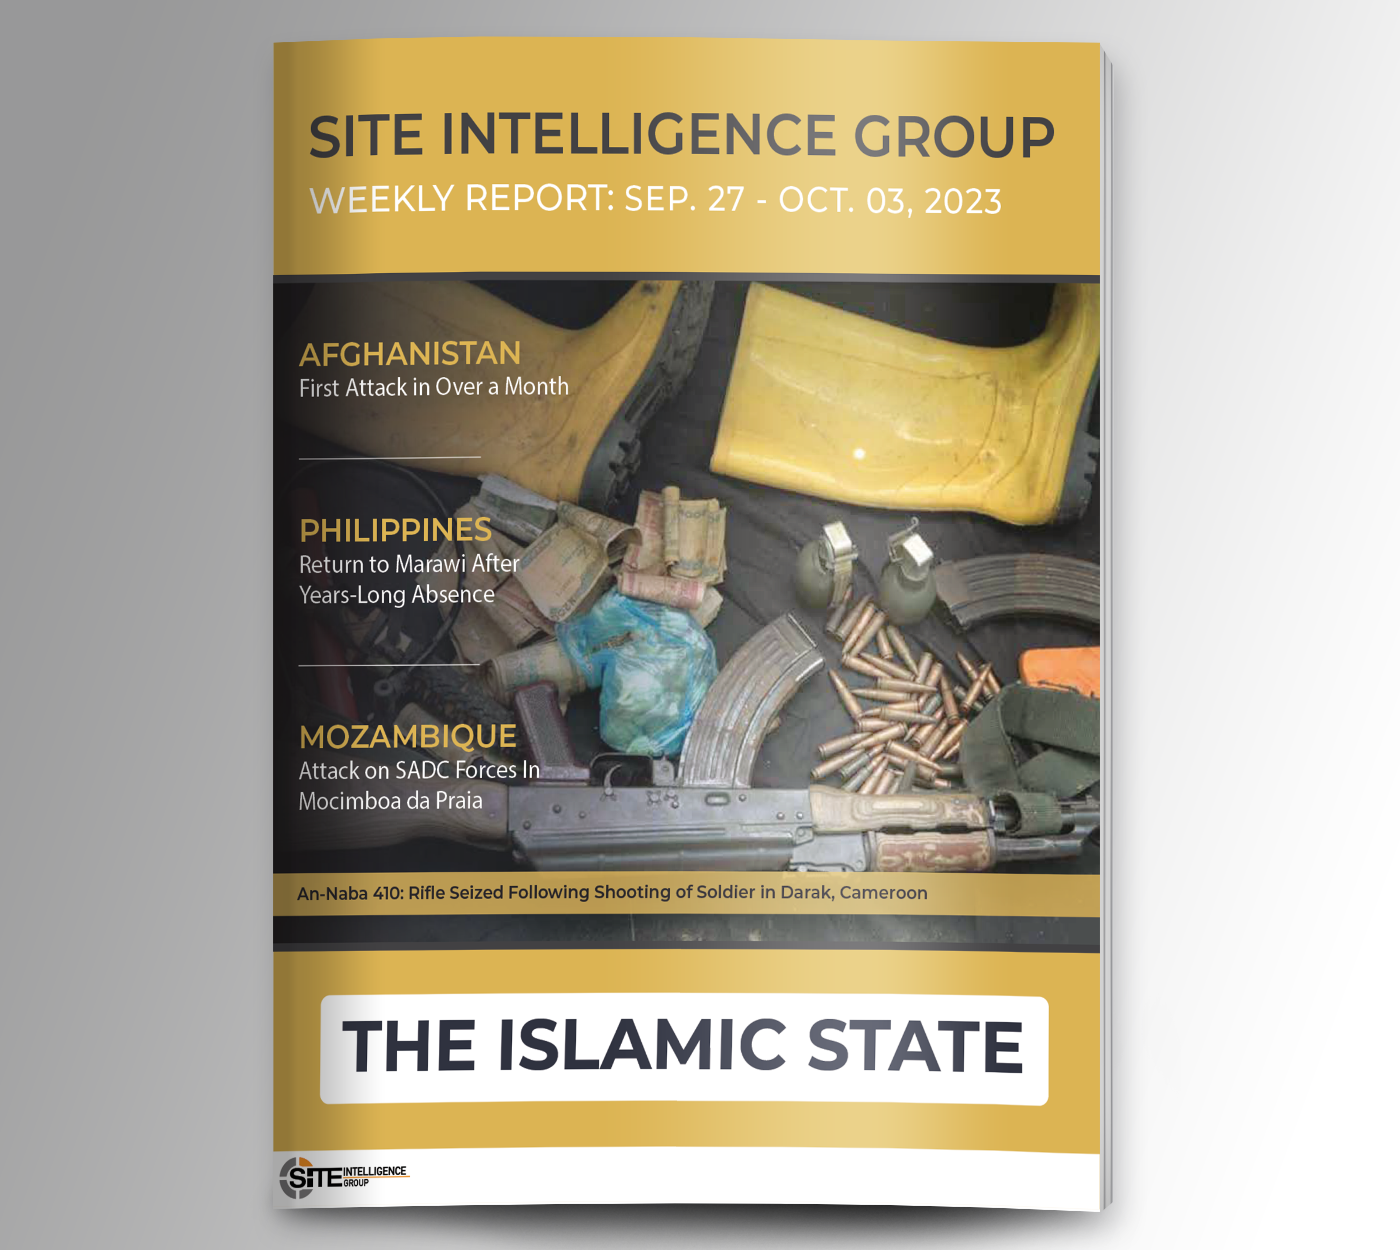 Weekly inSITE on the Islamic State for September 27-October 3, 2023